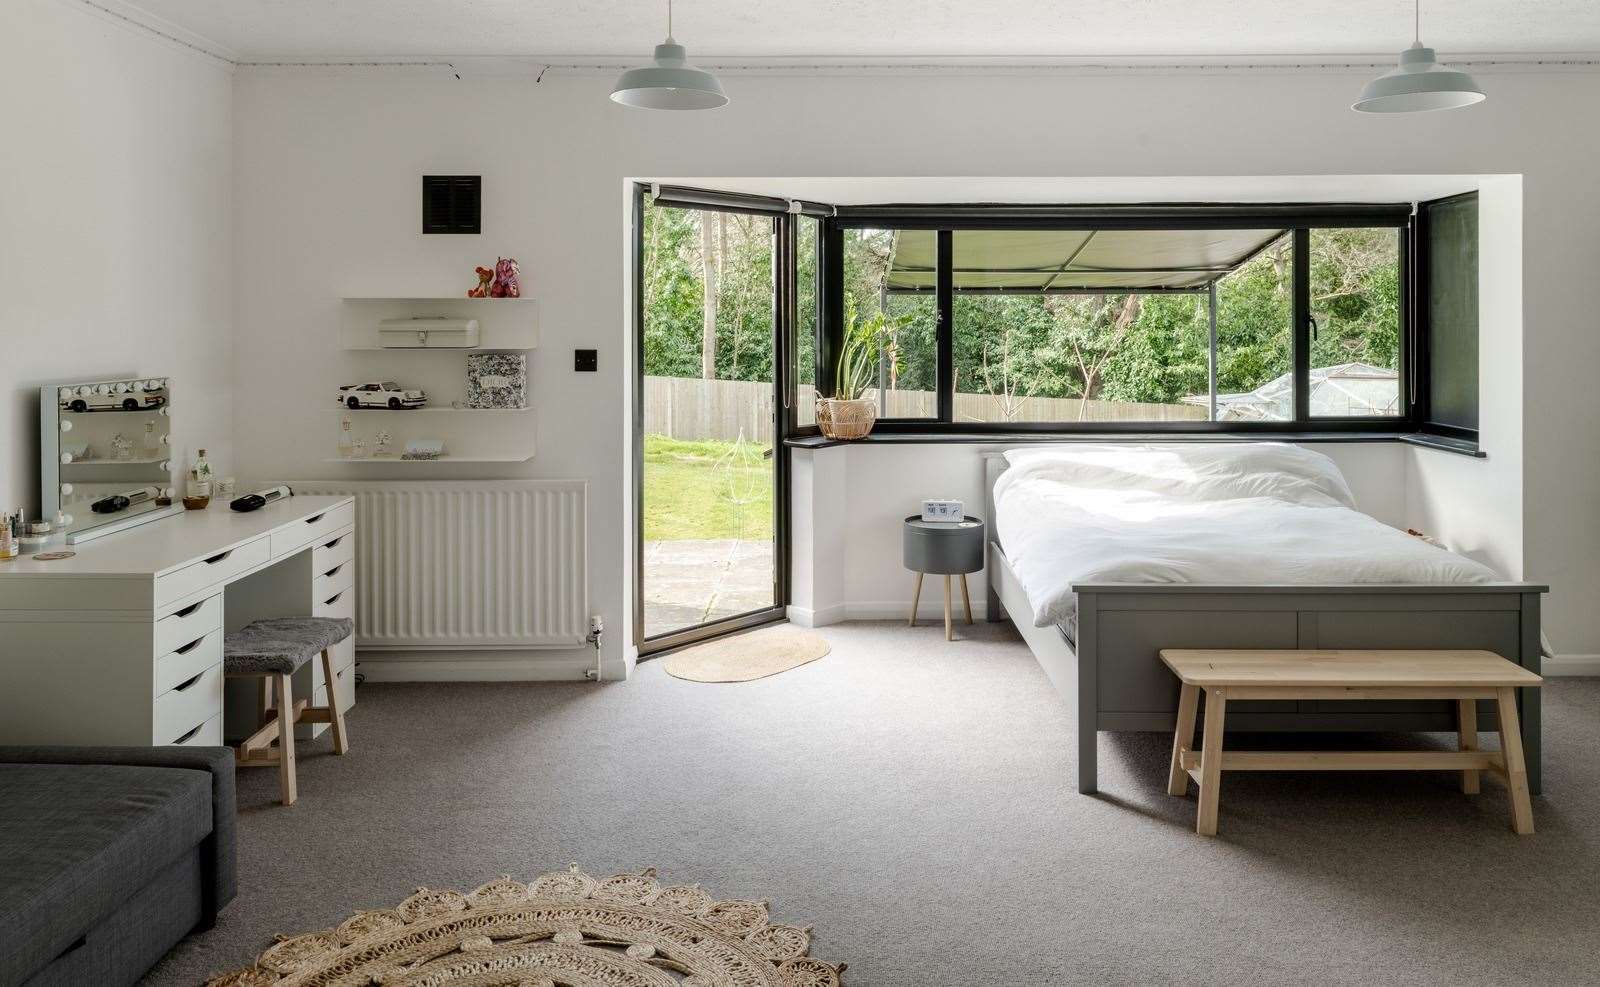 The five bedrooms include a master bedroom with an en-suite and its own terrace. Picture: The Modern House